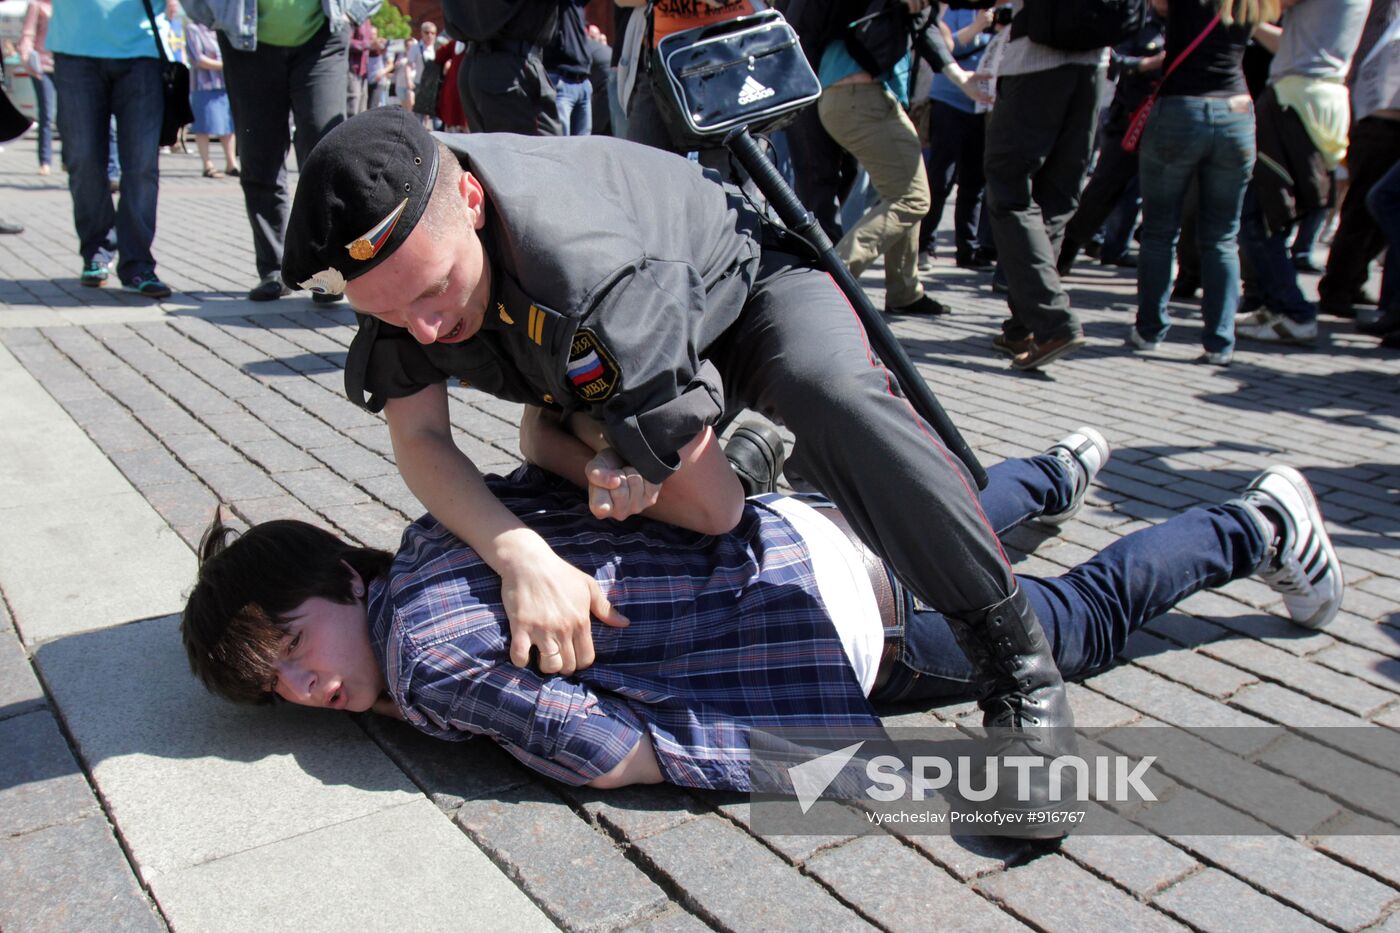 Moscow Gay Pride 2011